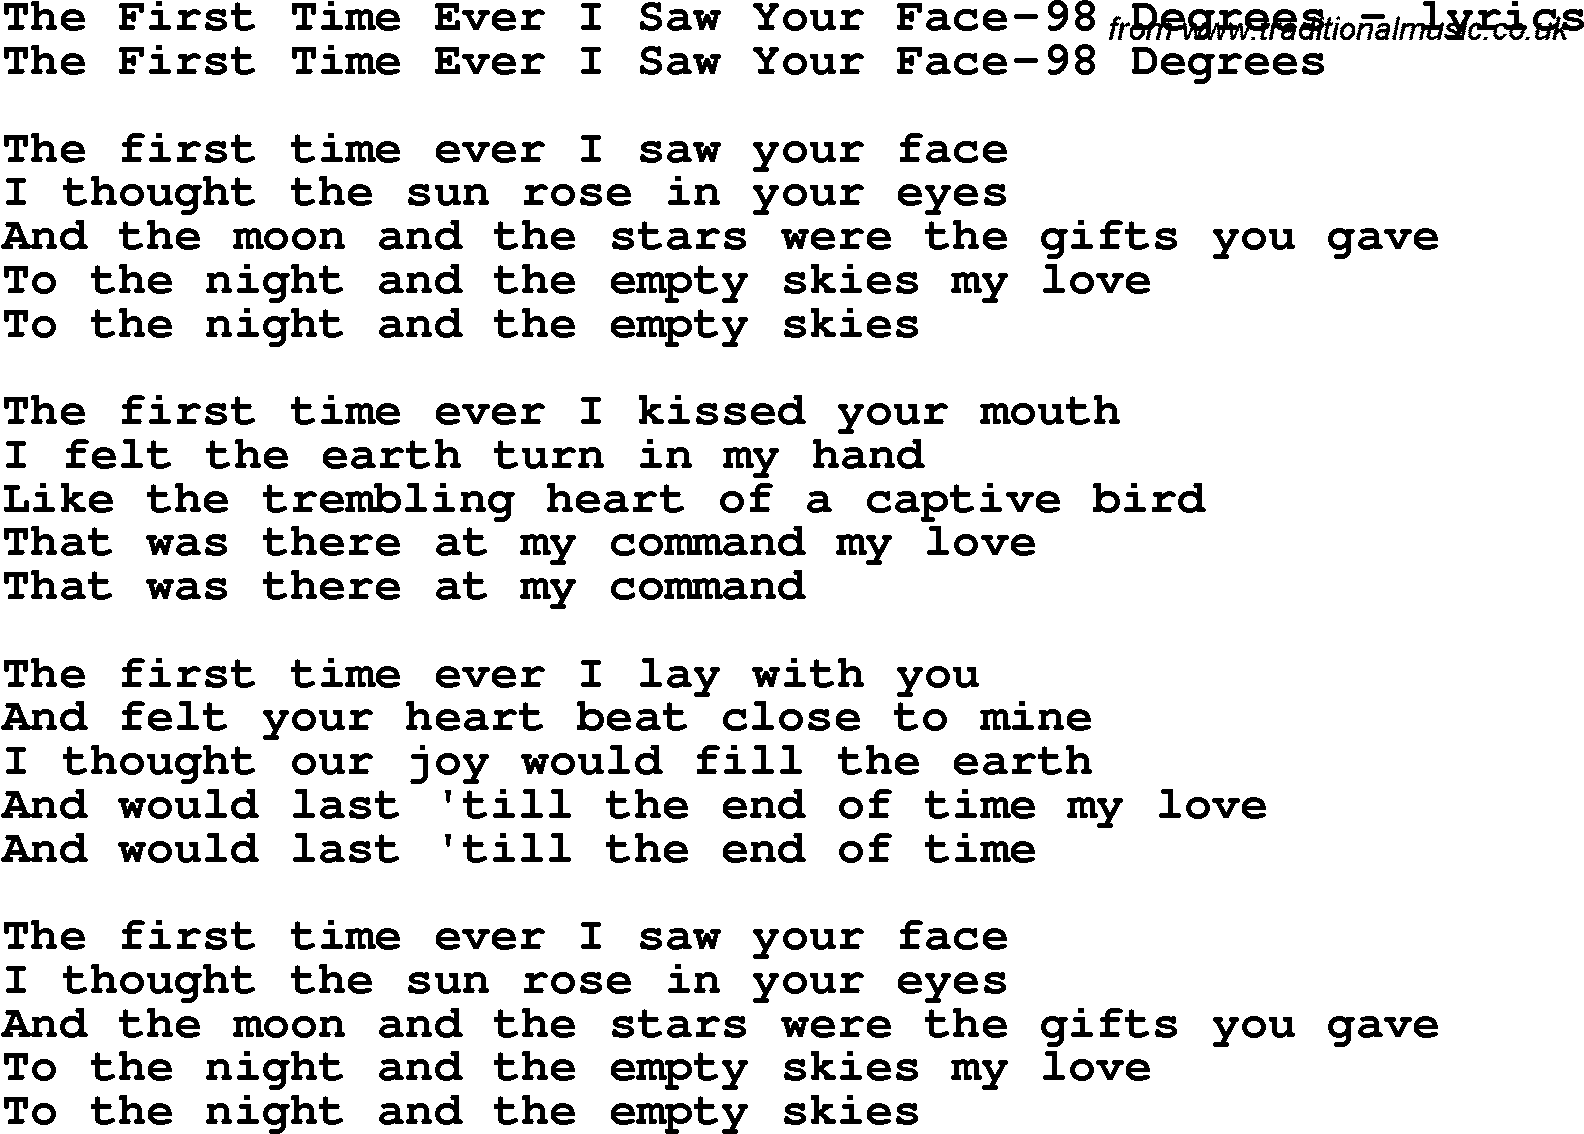 Love Song Lyrics for: The First Time Ever I Saw Your Face-98 Degrees